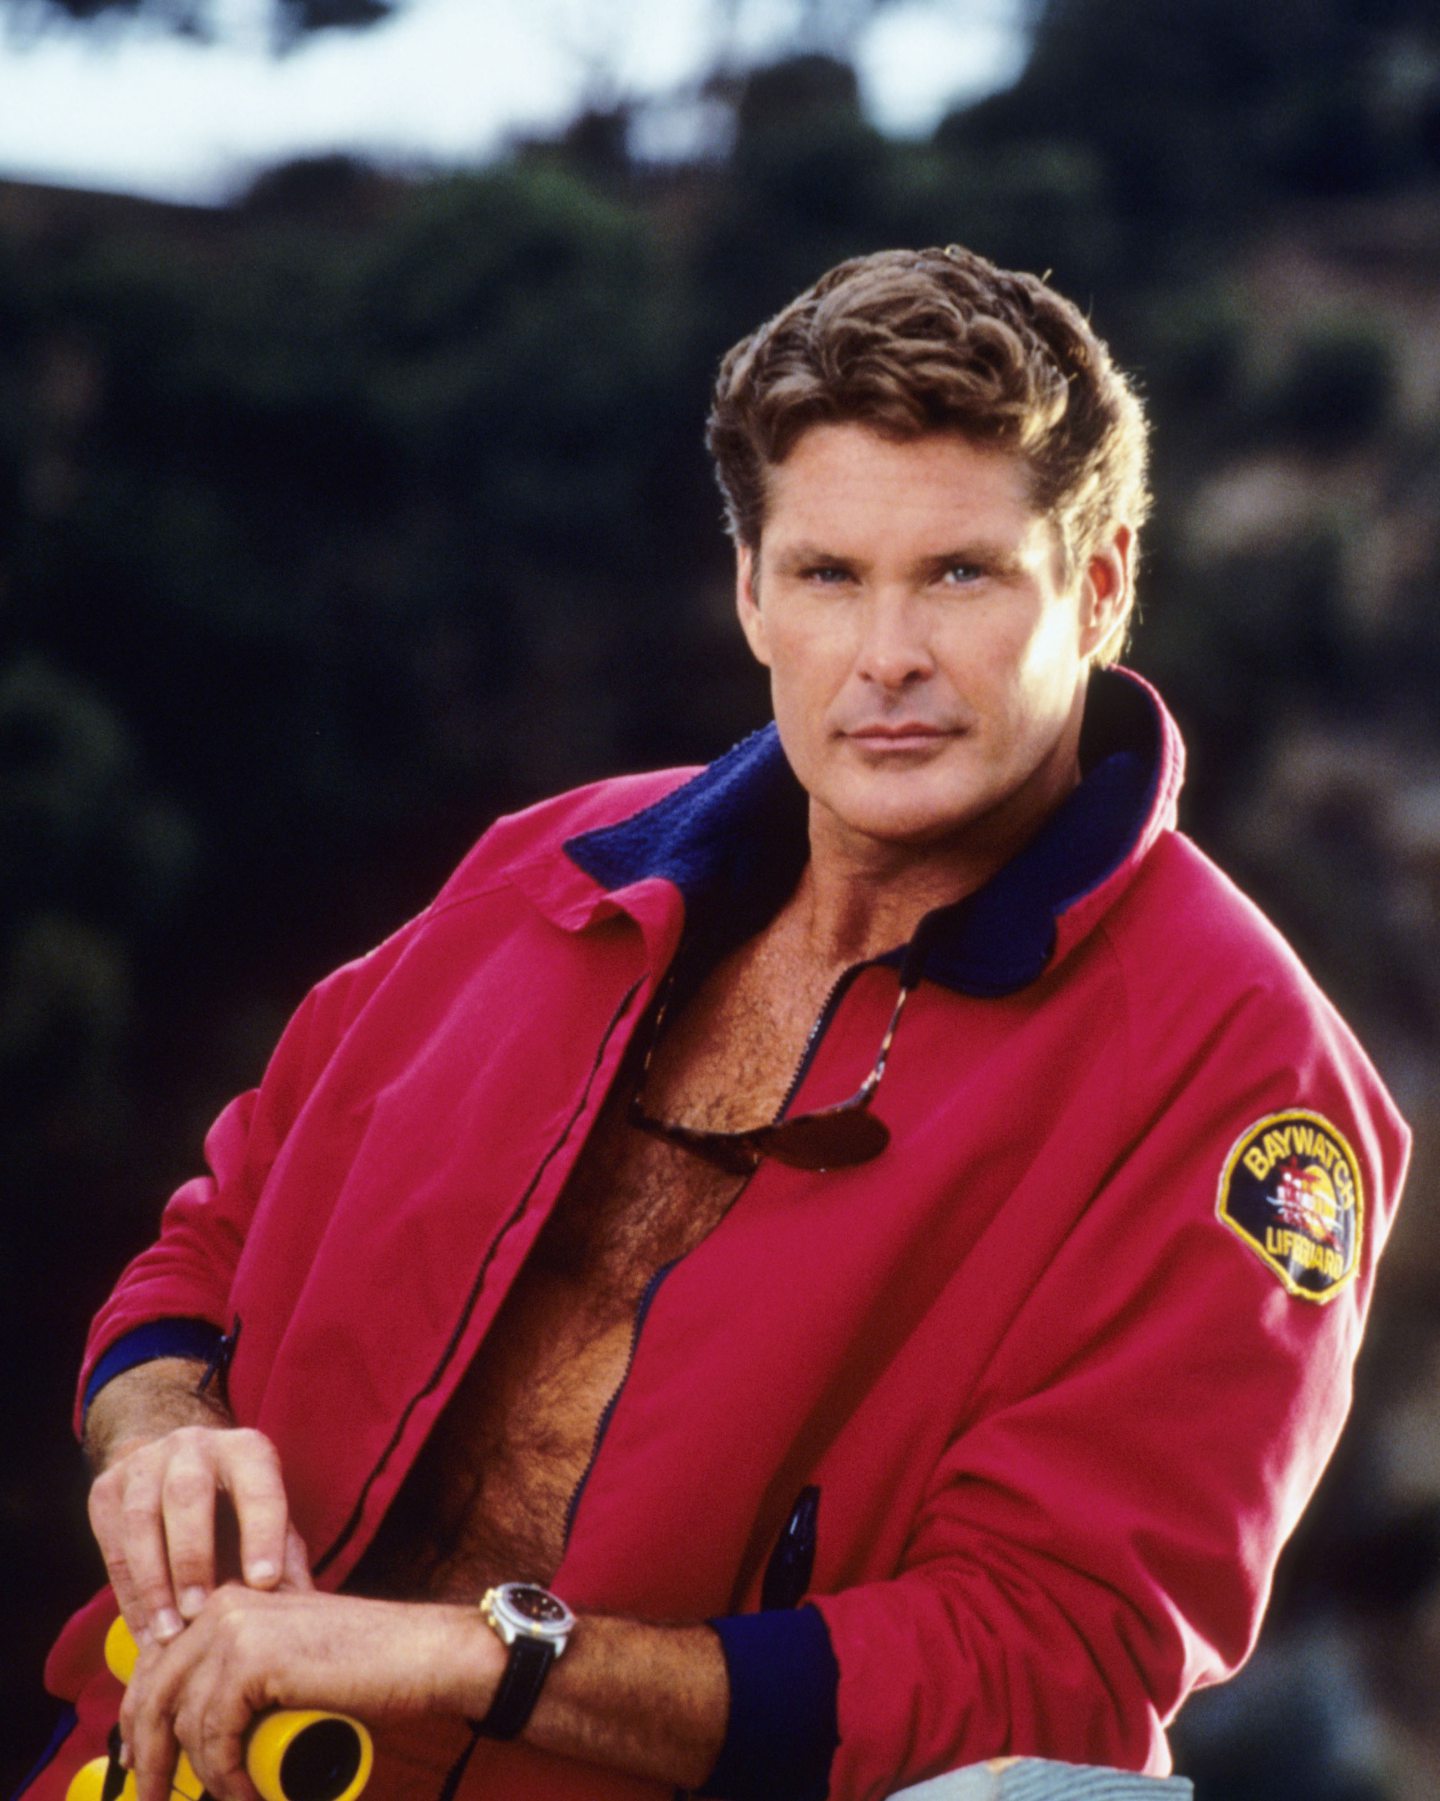 David Hasselhoff in his Baywatch lifeguard outfit